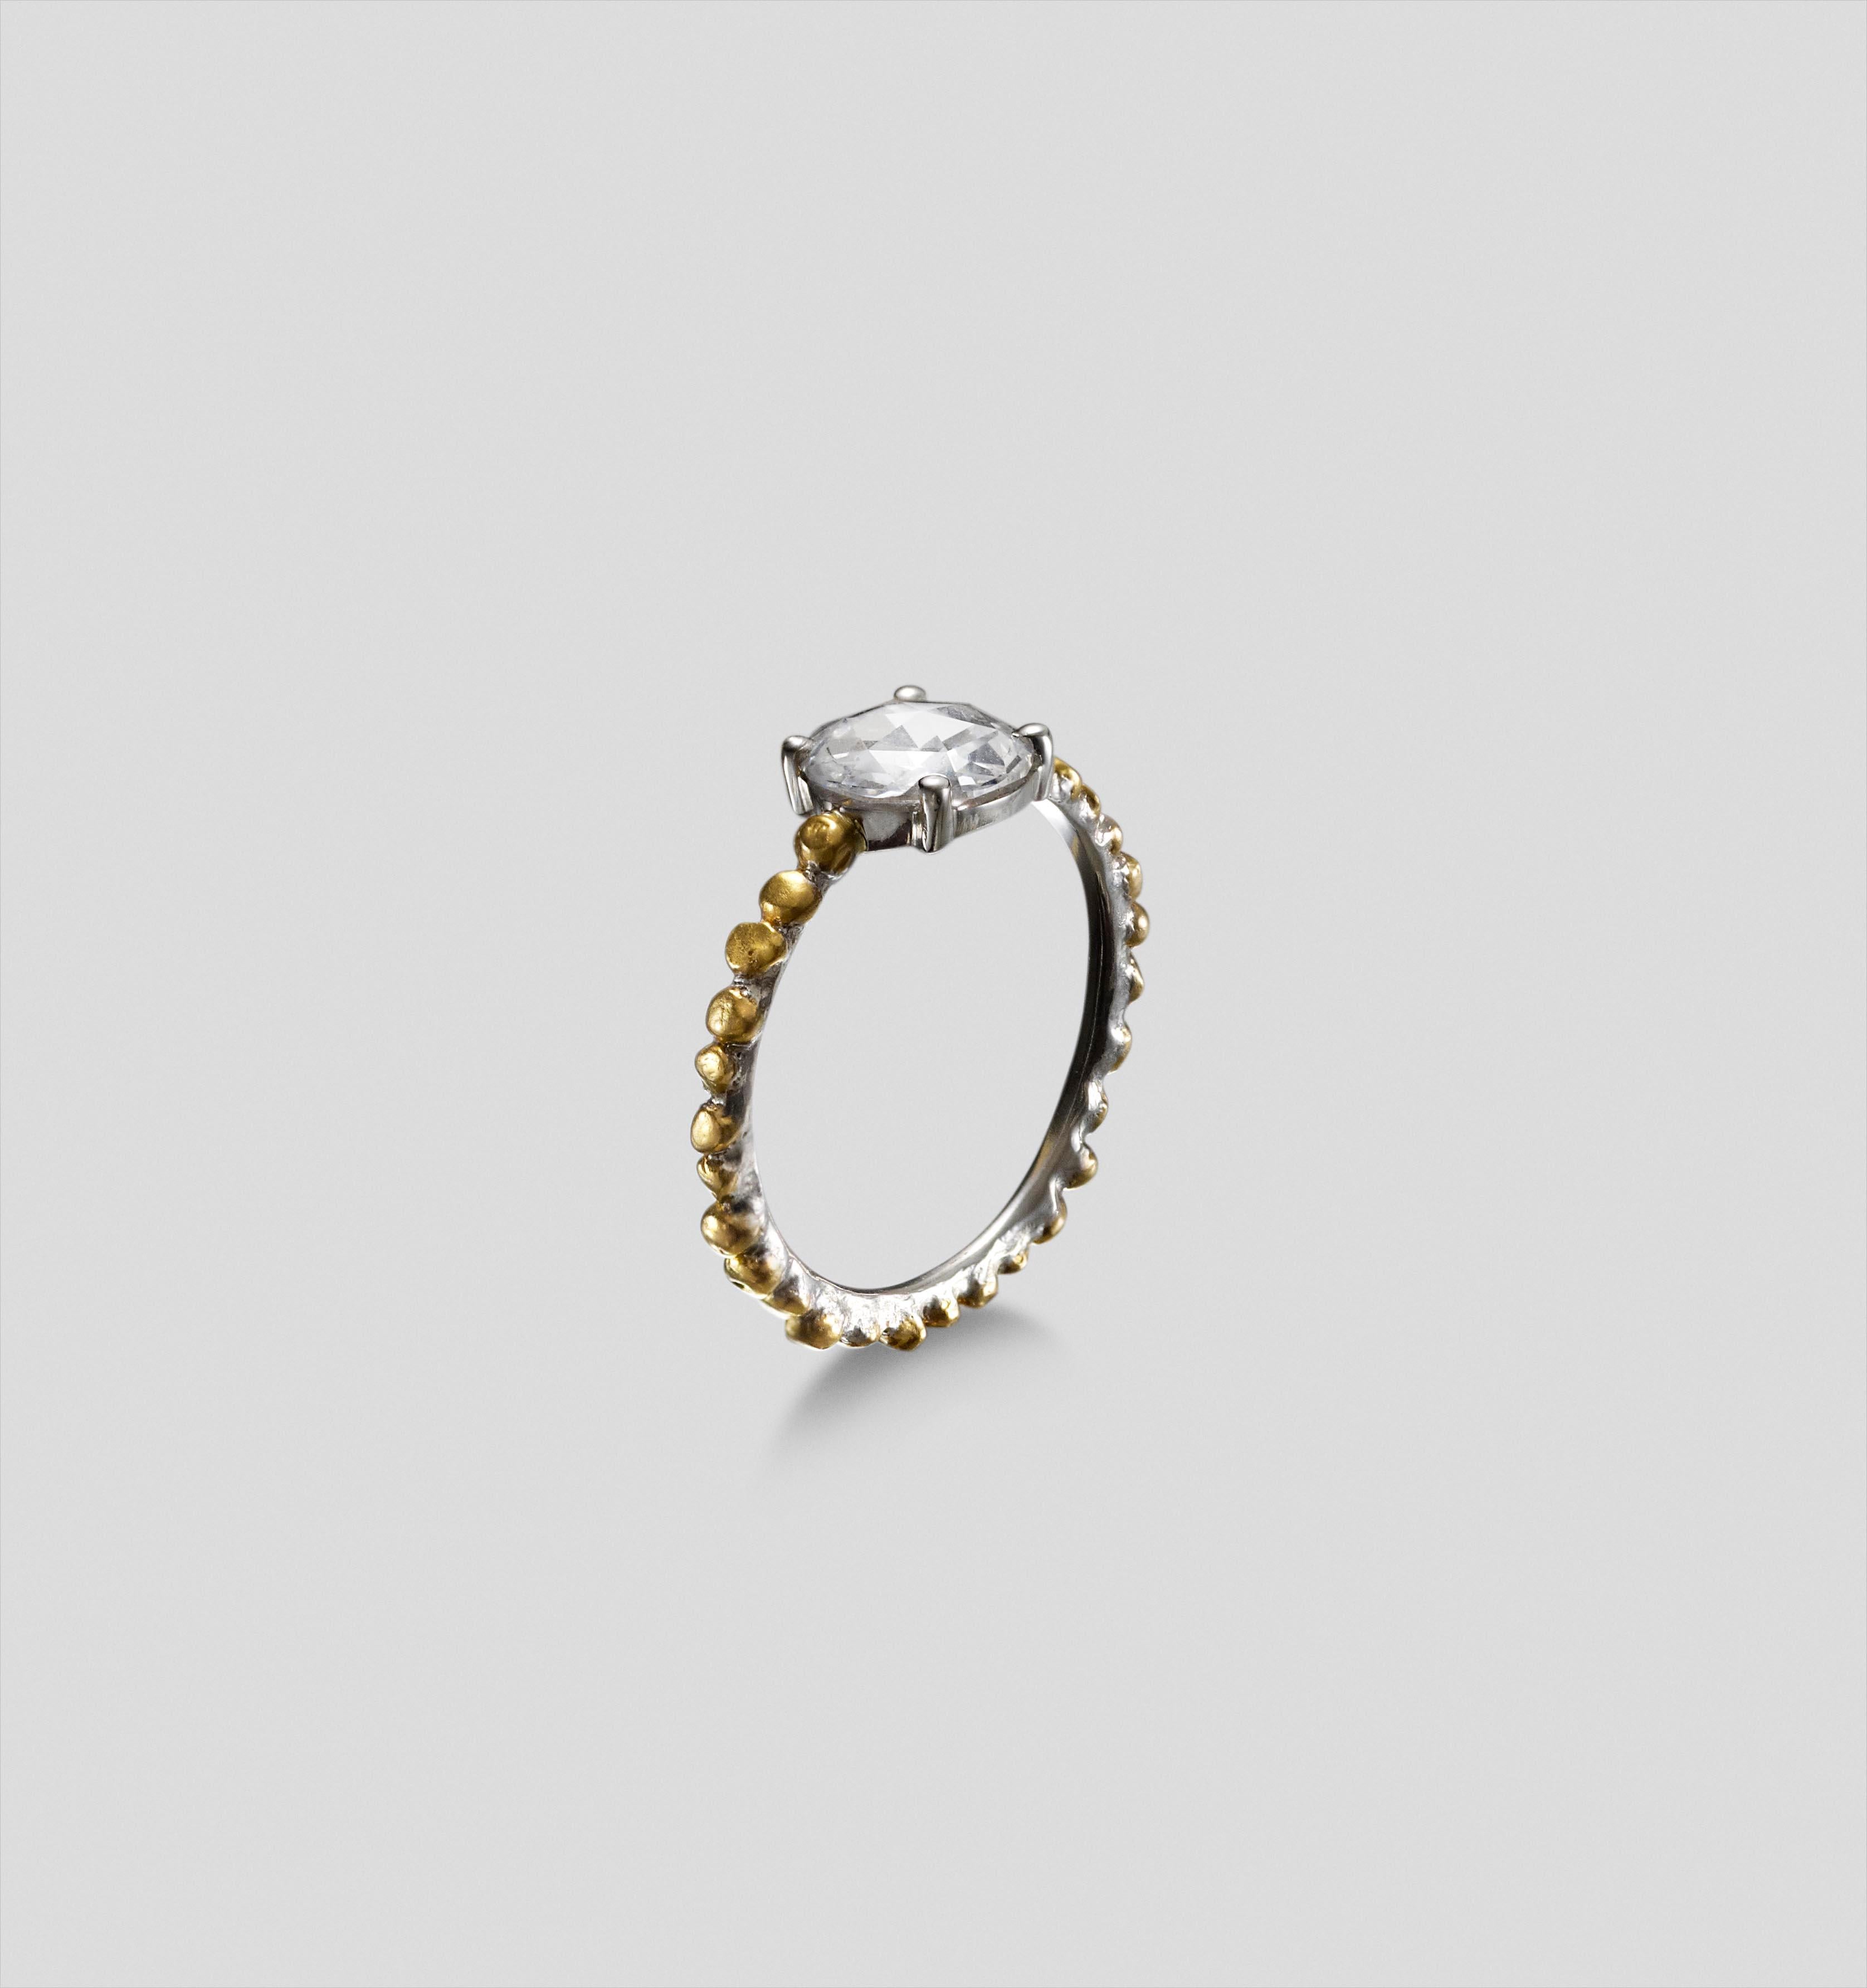 This collection bonds together the beautiful intensity of 24 carat gold with polished platinum to create a luxurious look with a raw and organic style.  The ring sits low on the finger and has a groove under the collet to fit a matching band.

A